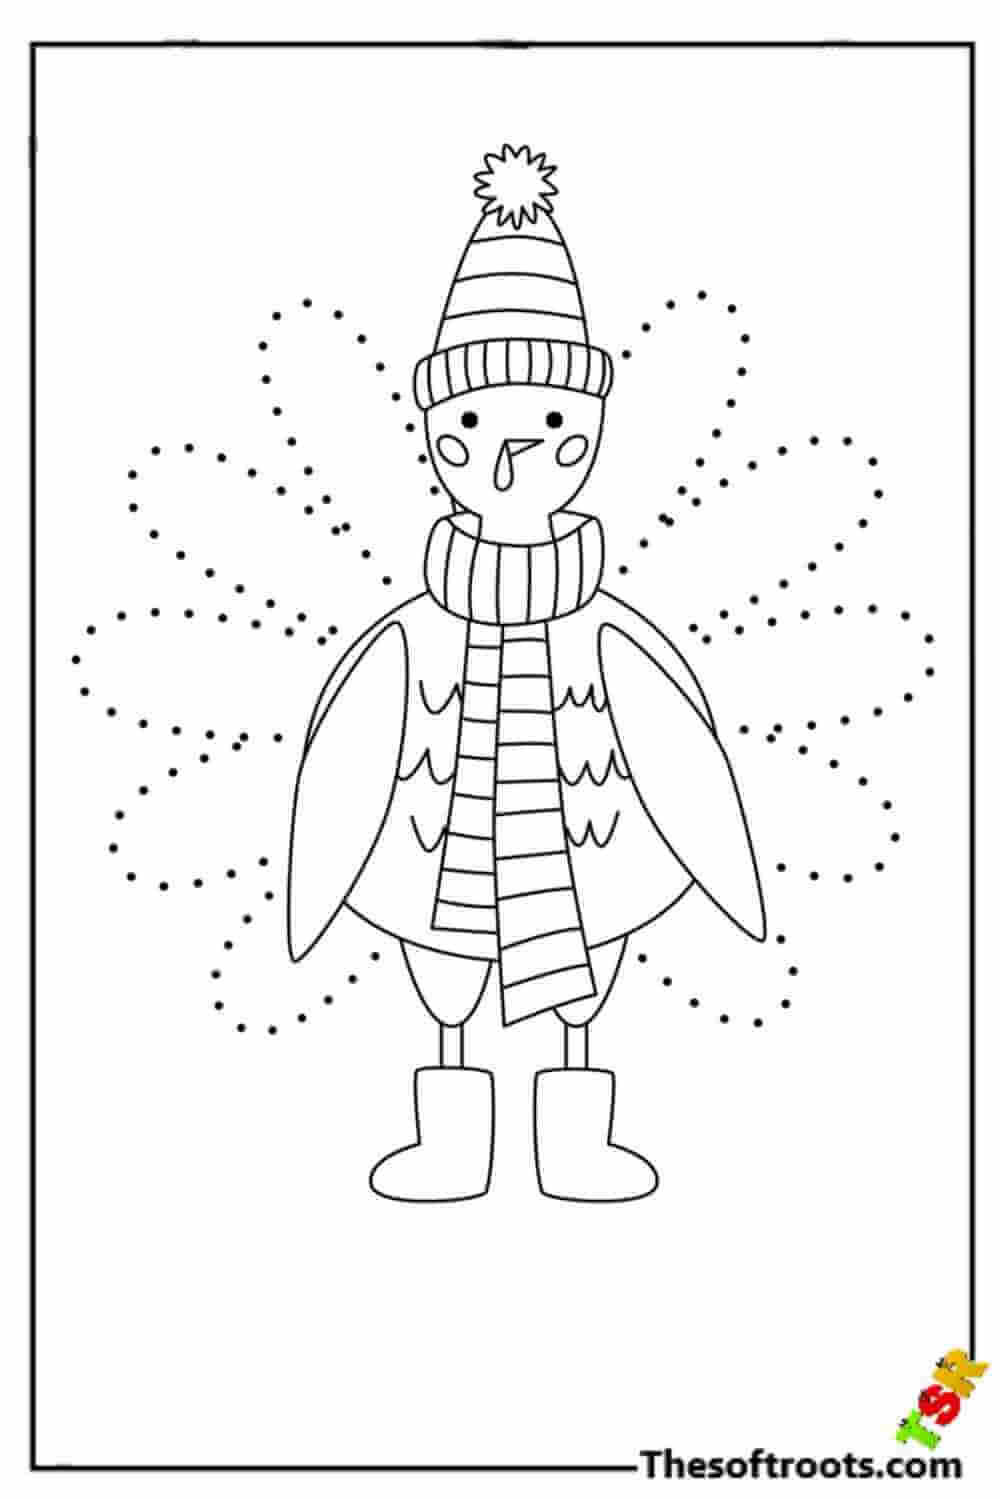 Connect the dots coloring pages